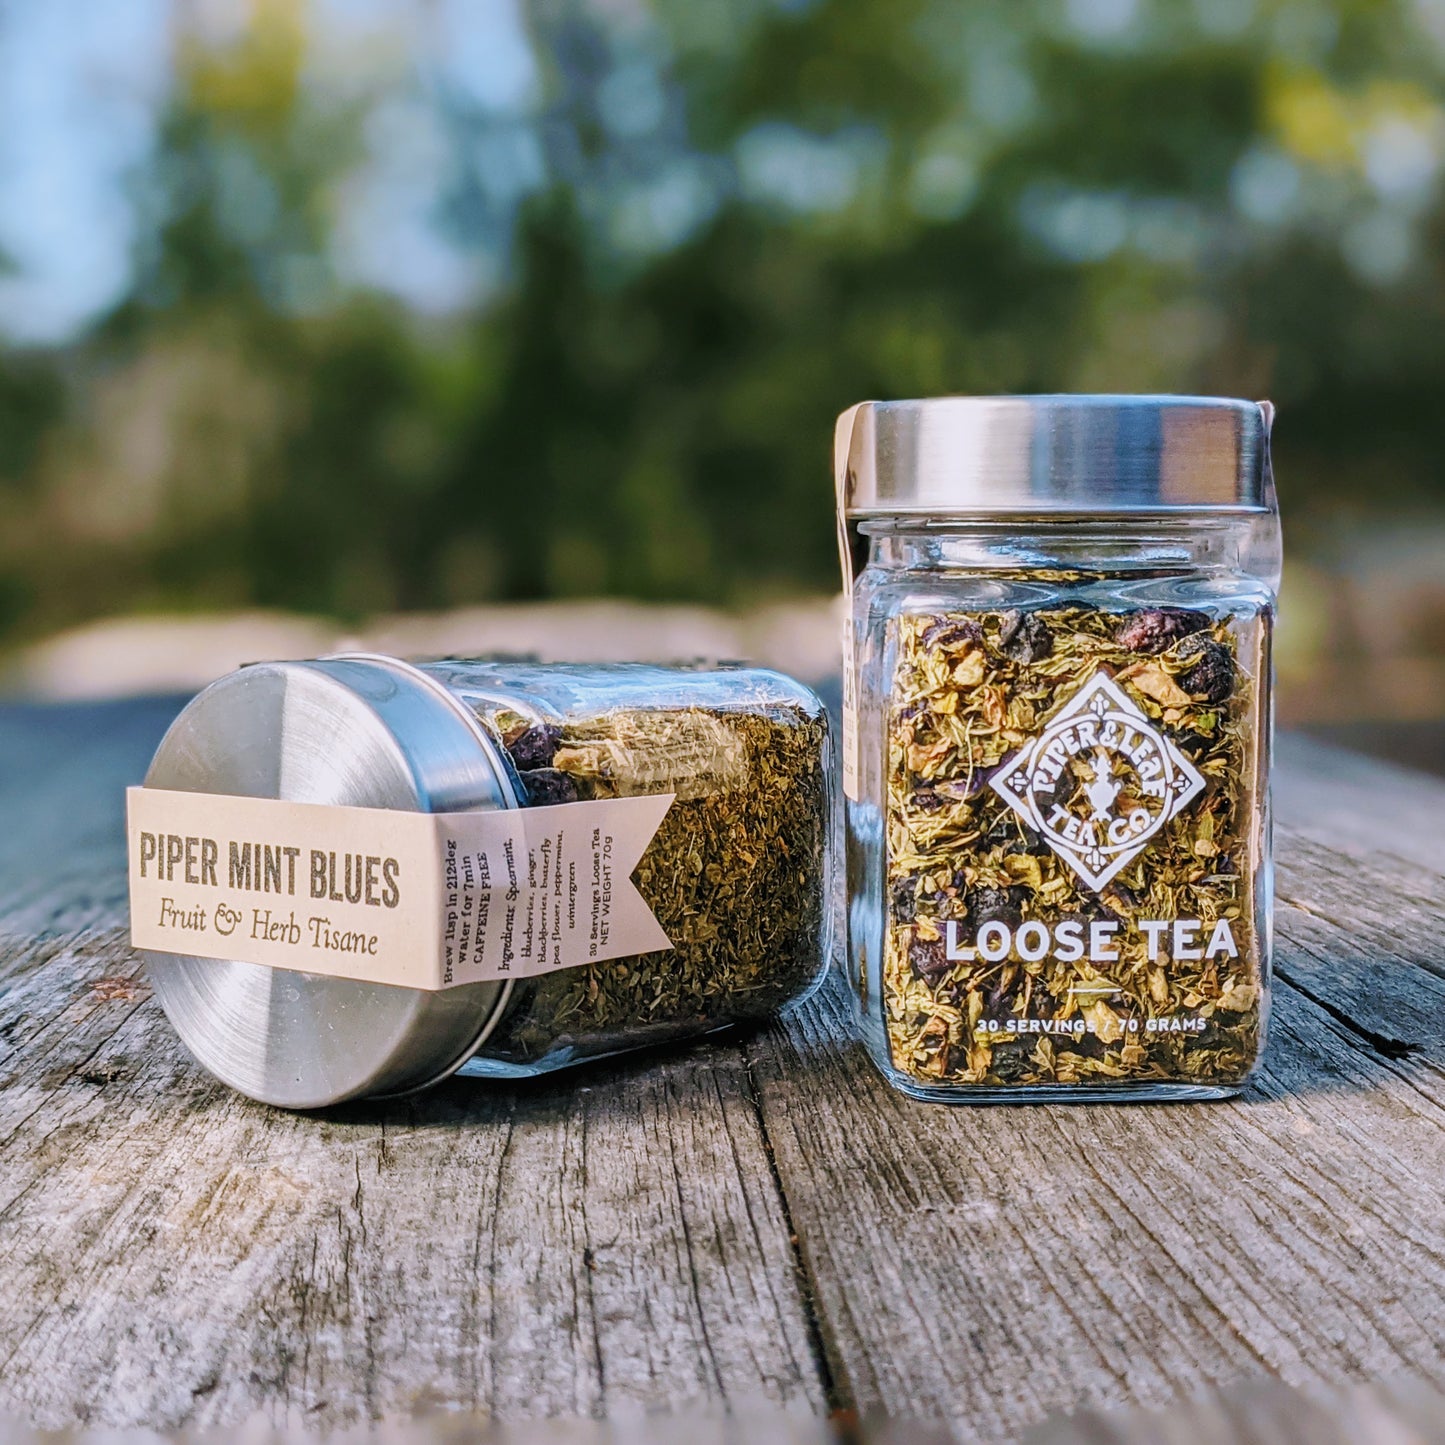 Piper & Leaf Tea Co.'s Piper Mint Blues Glass Jar of Loose Leaf Tea - 30 Servings with a hint of ginger on a wooden table.